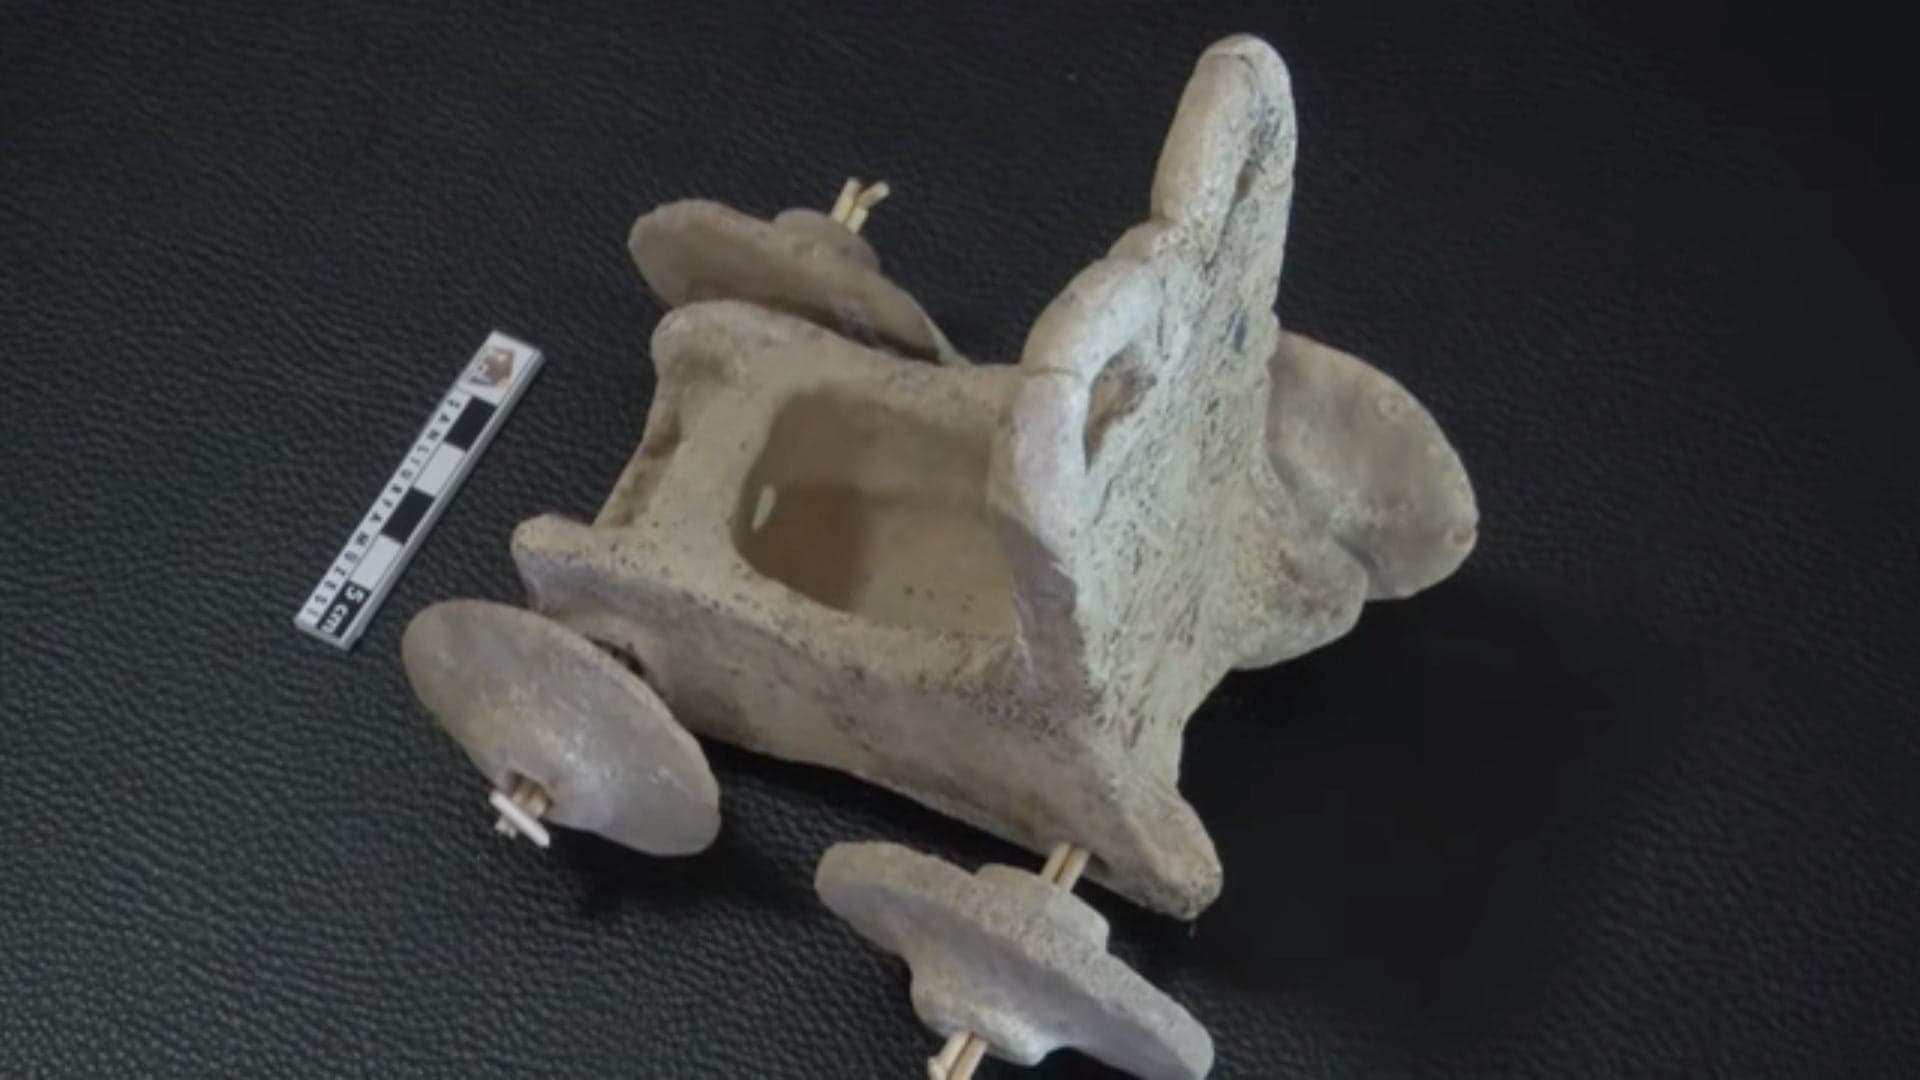 5,000-Year-Old Version of a Toy Car Found in Archeological Dig in Turkey